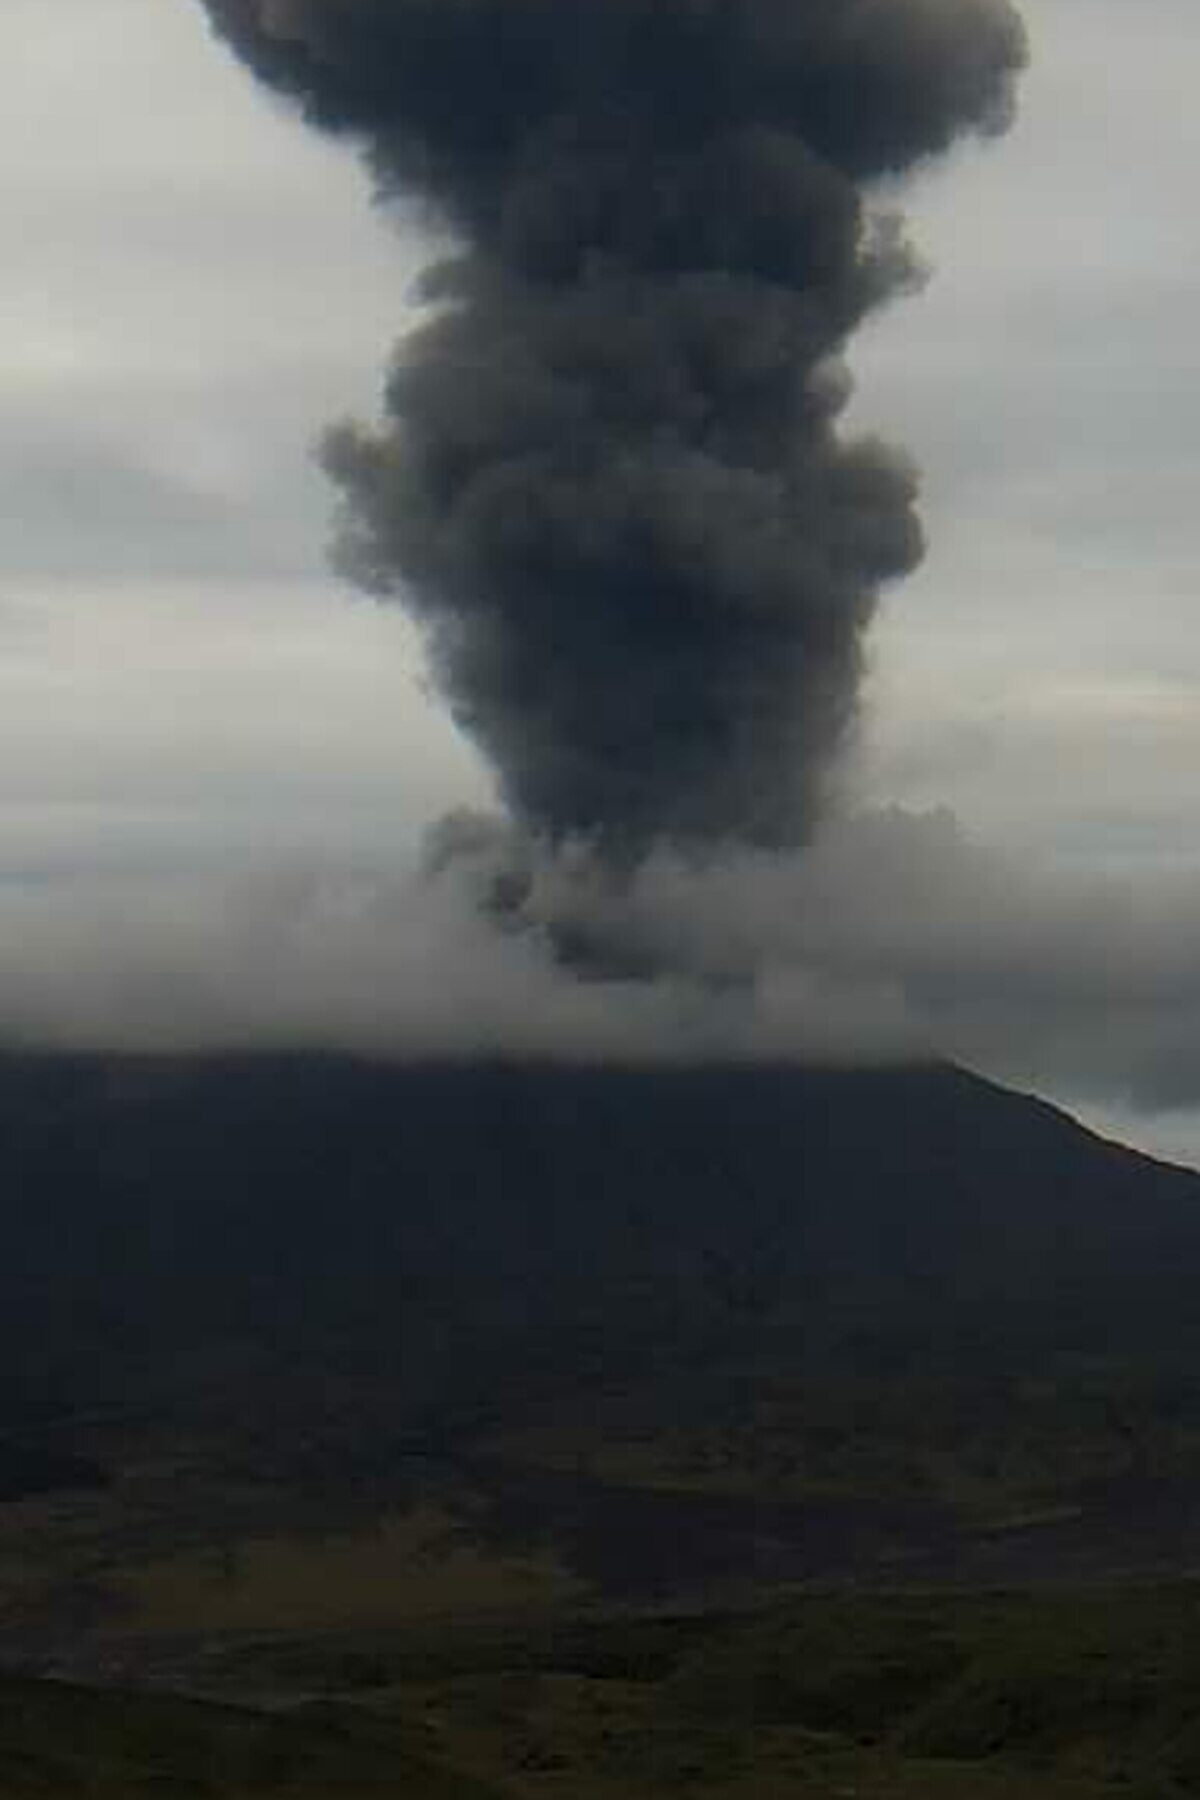 Ash plume from the North Cerberus crater at Semisopochnoi 9 minutes after the start of the eruption.